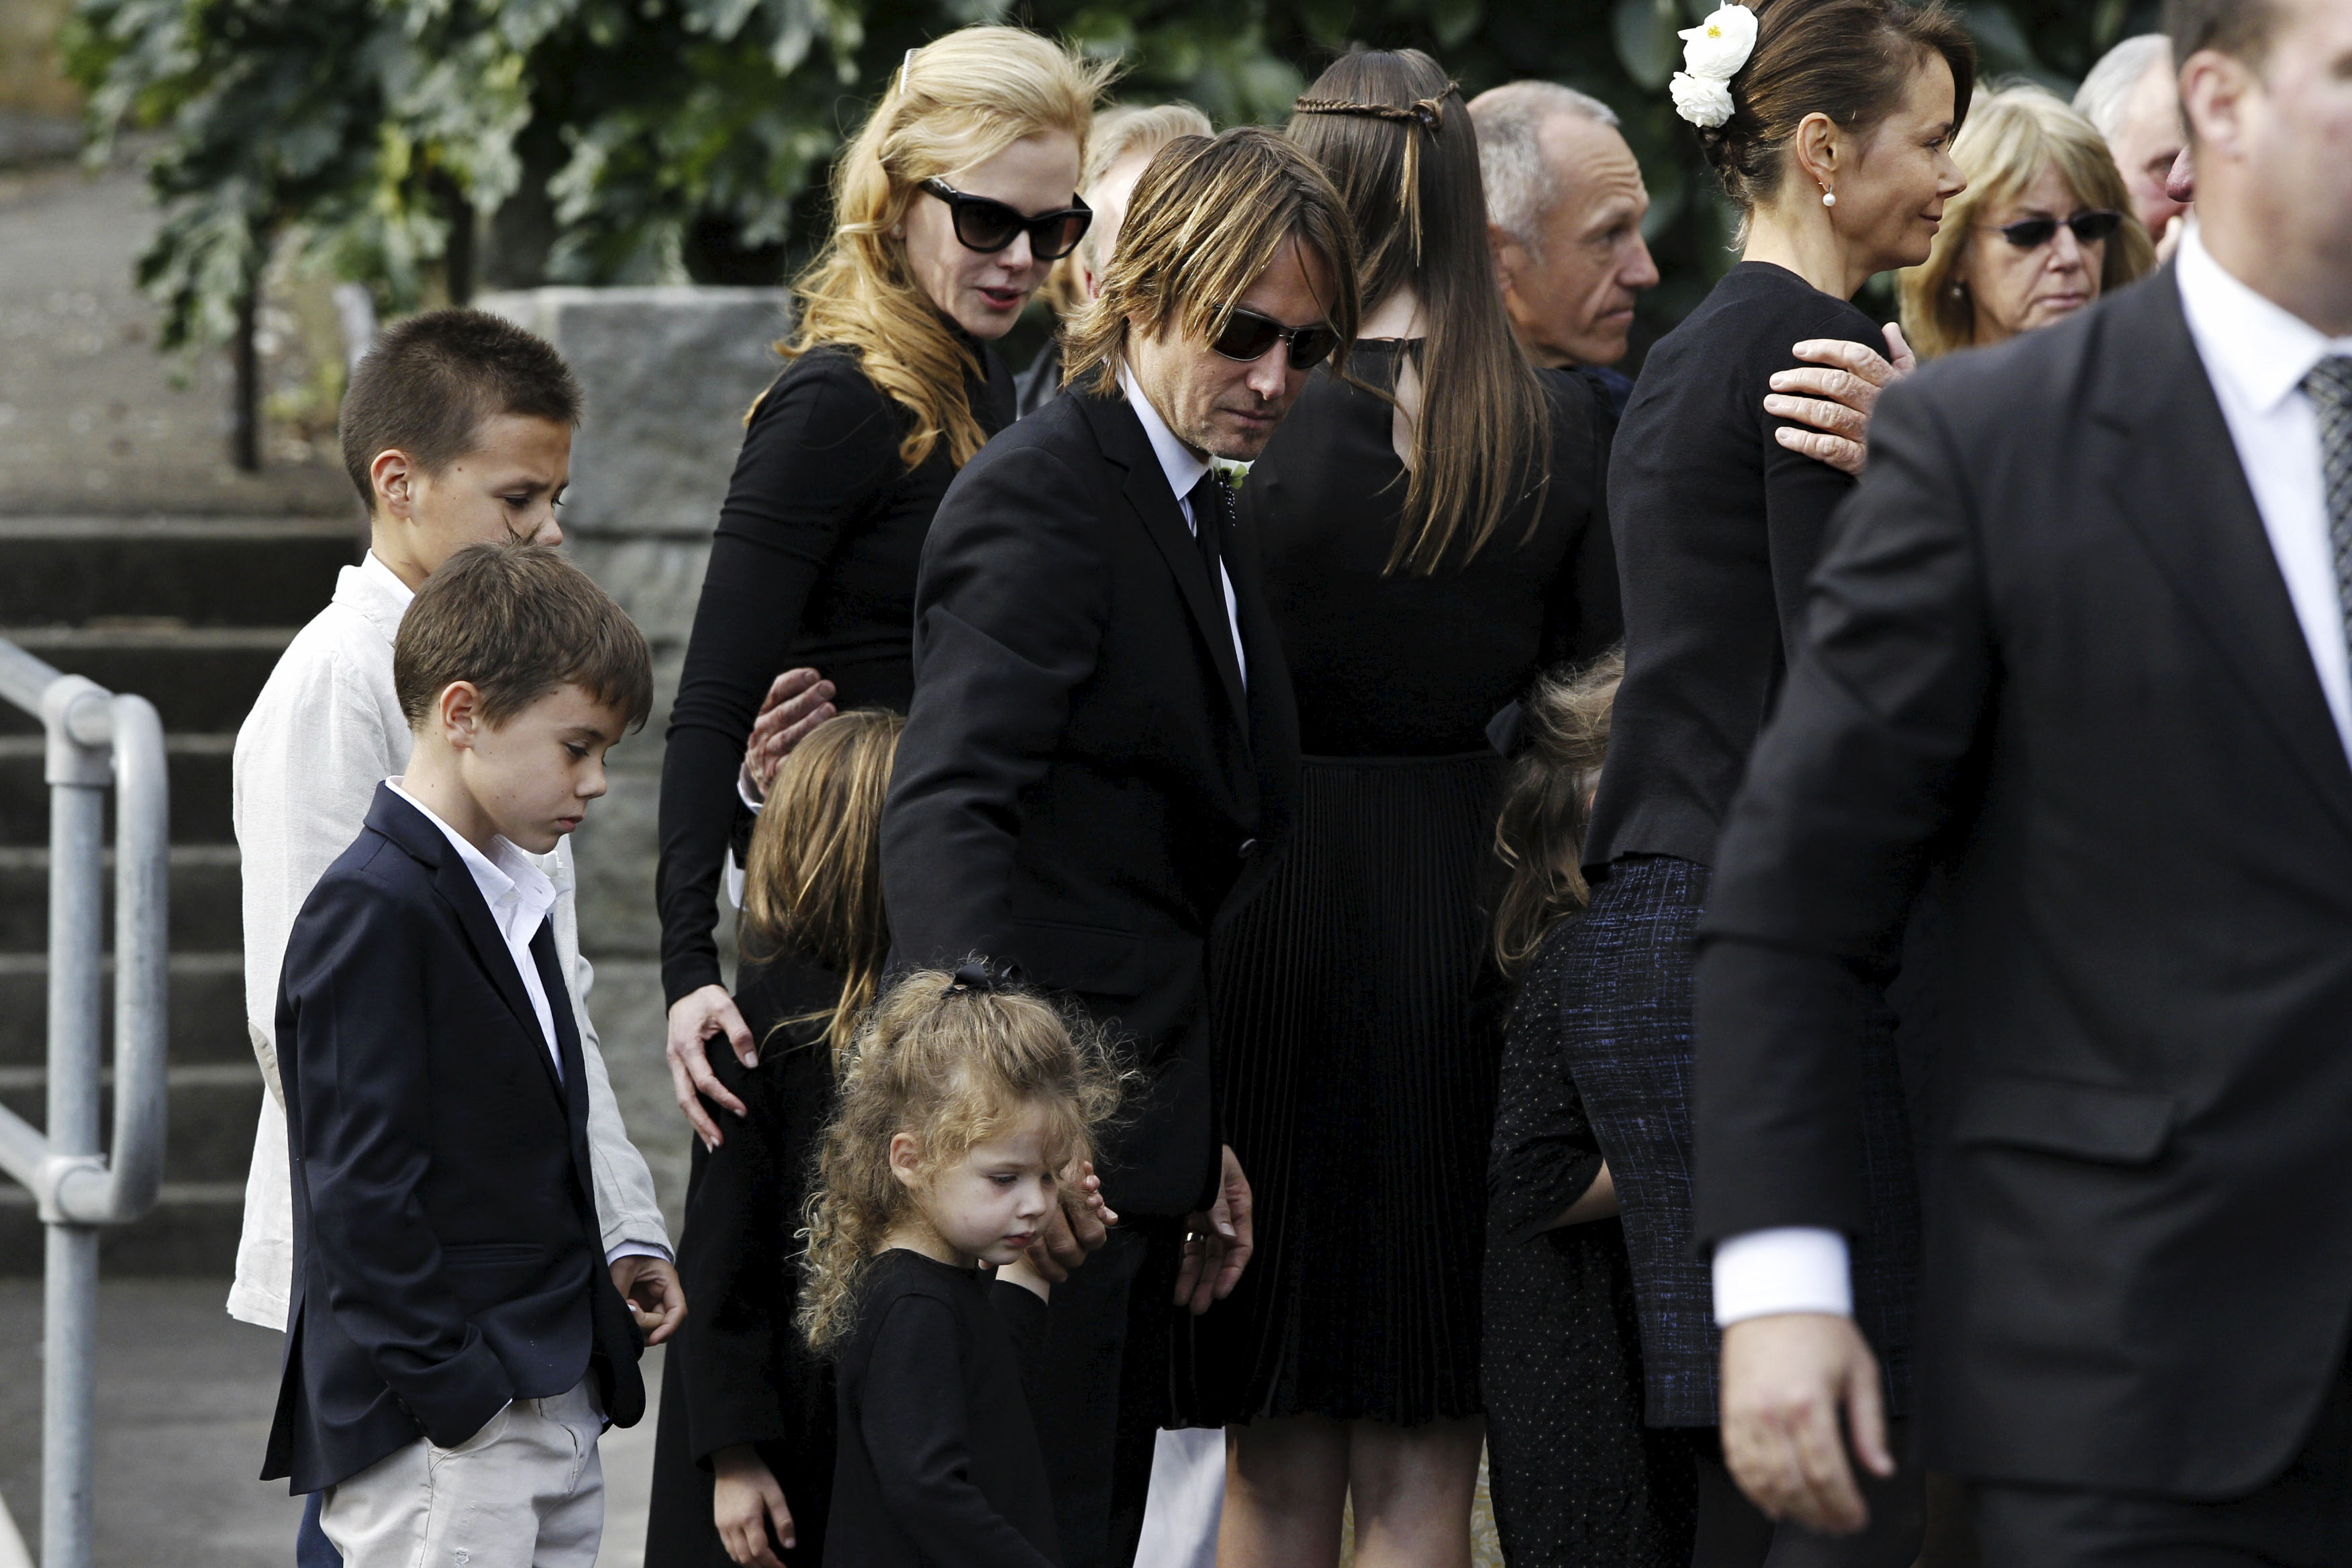 Nicole Kidman, Keith Urban and family attend at St Francis Xavier Church in Lavender Bay on September 19, 2014 in Sydney, Australia | Source: Getty Images